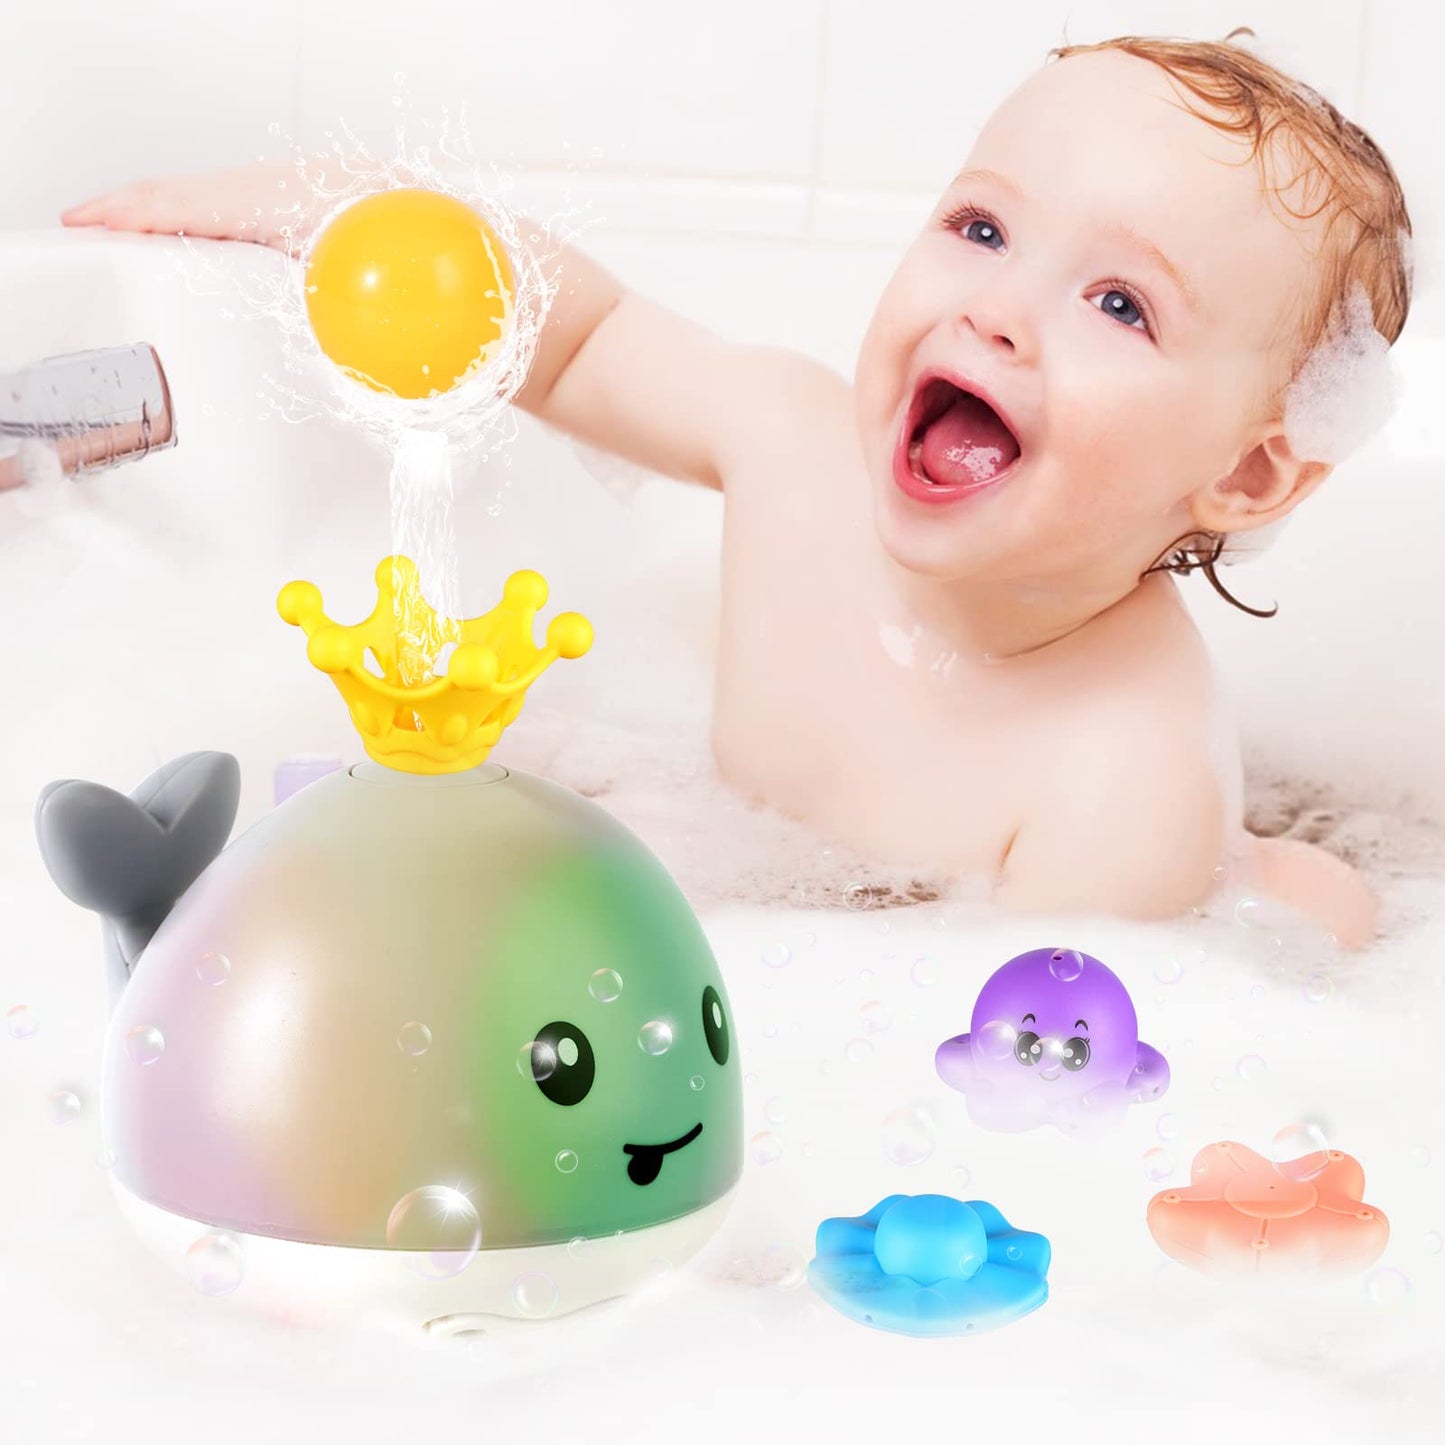 Whale Bath Toys Rechargeable With 4 Modes-Grey - Gigilli